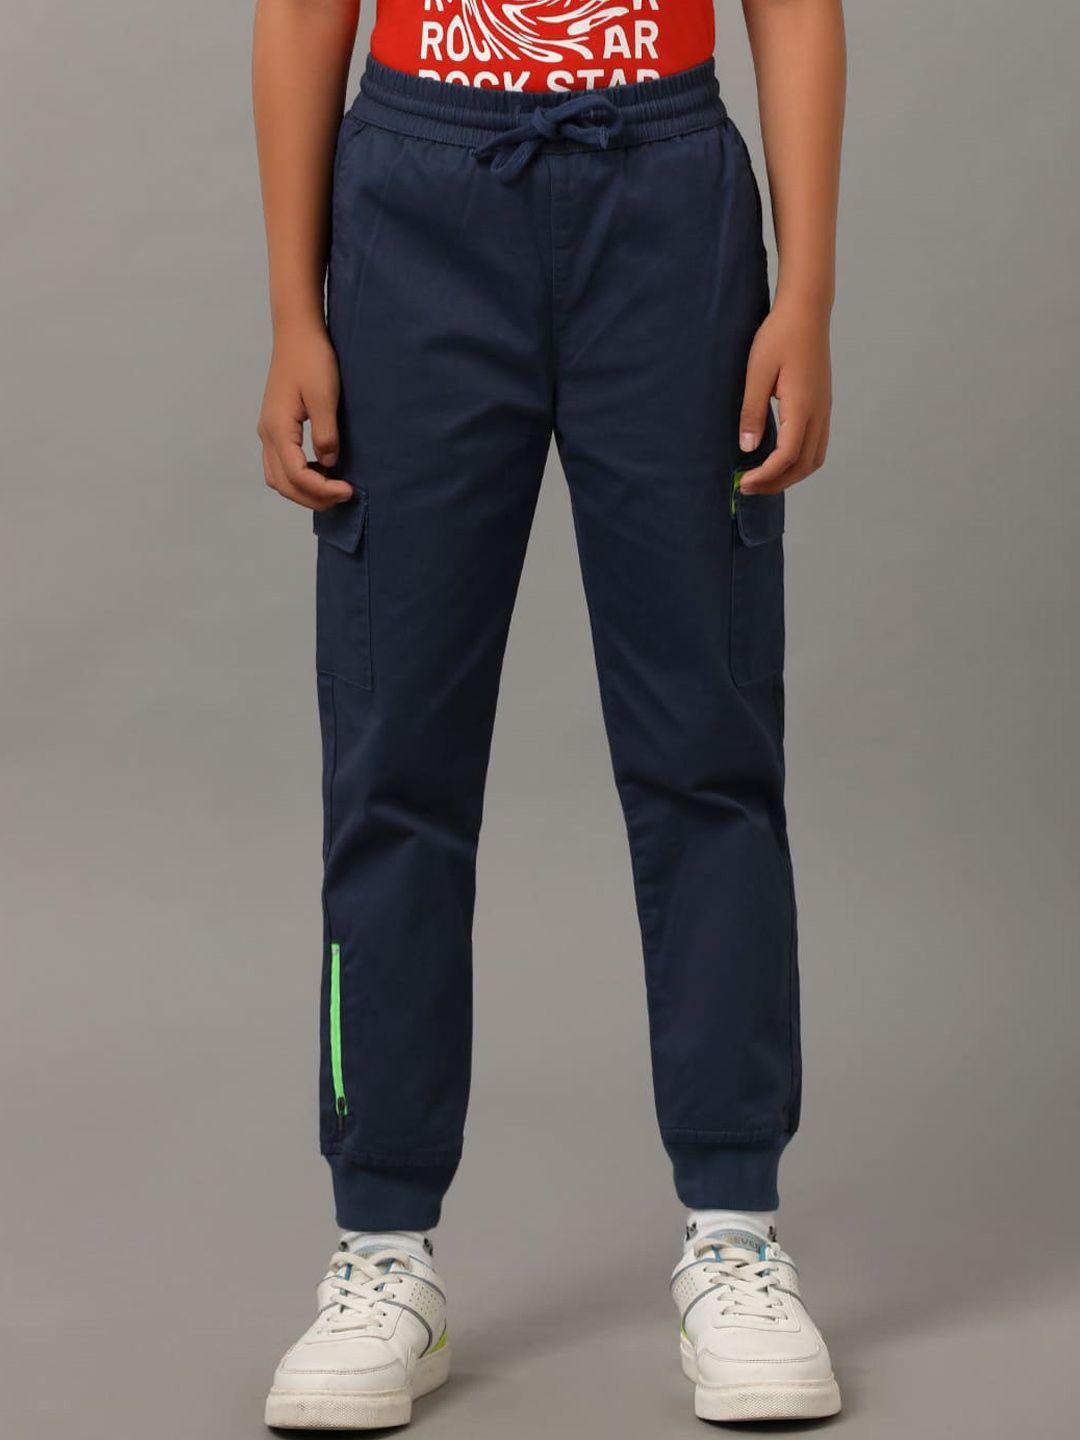 under-fourteen-only-boys-cotton-joggers-trousers